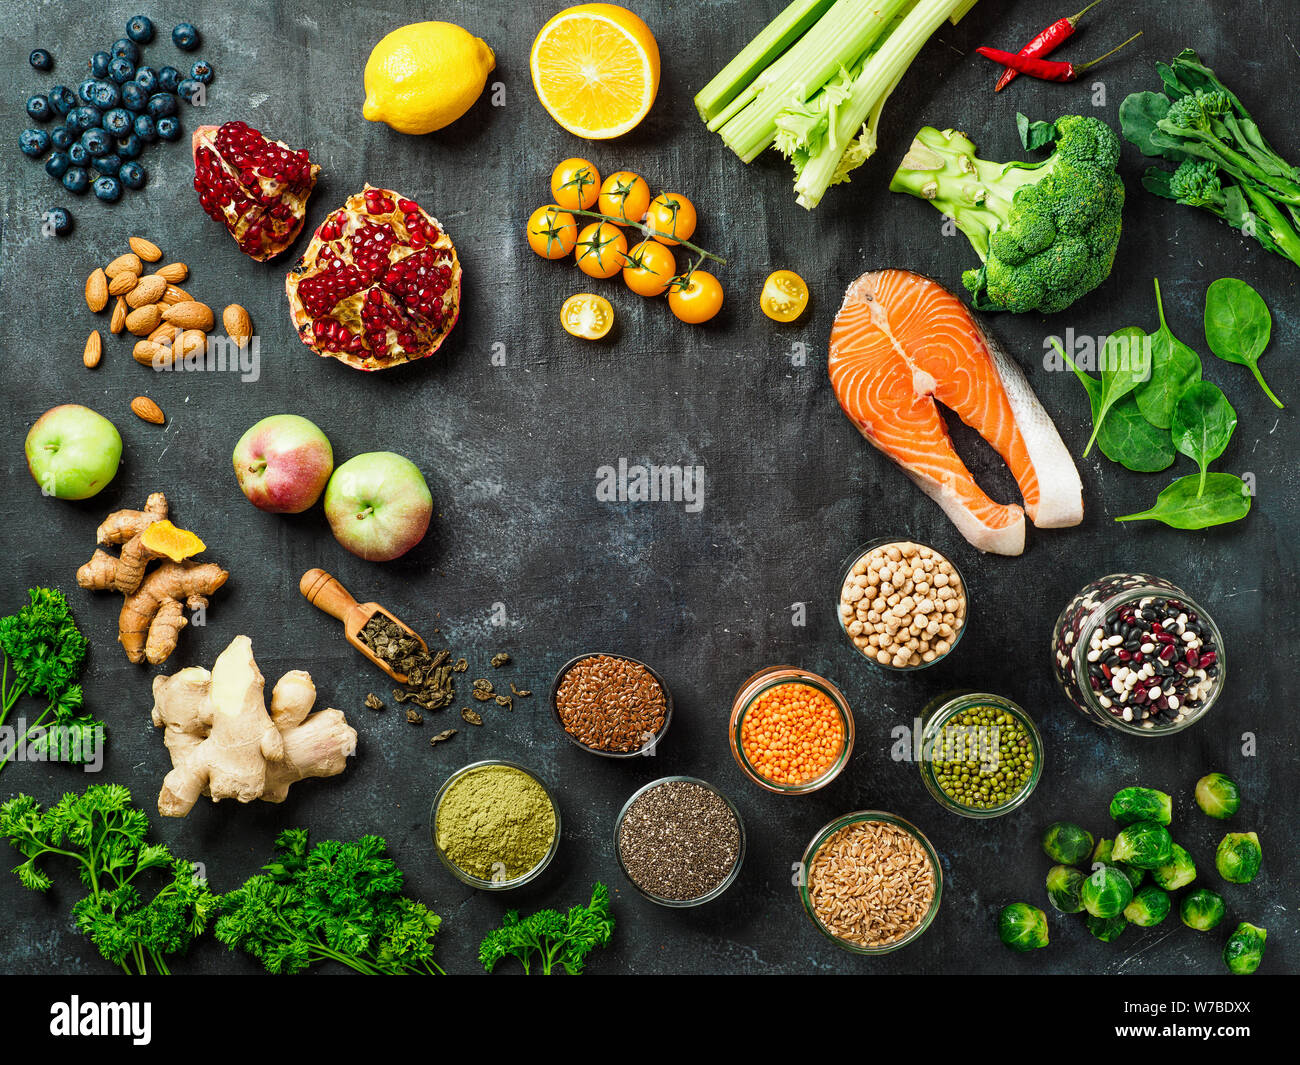 Clean Eating concept with copy space in center. Selection food ingredients for Clean Eating on dark background. Top view or flat lay. Stock Photo